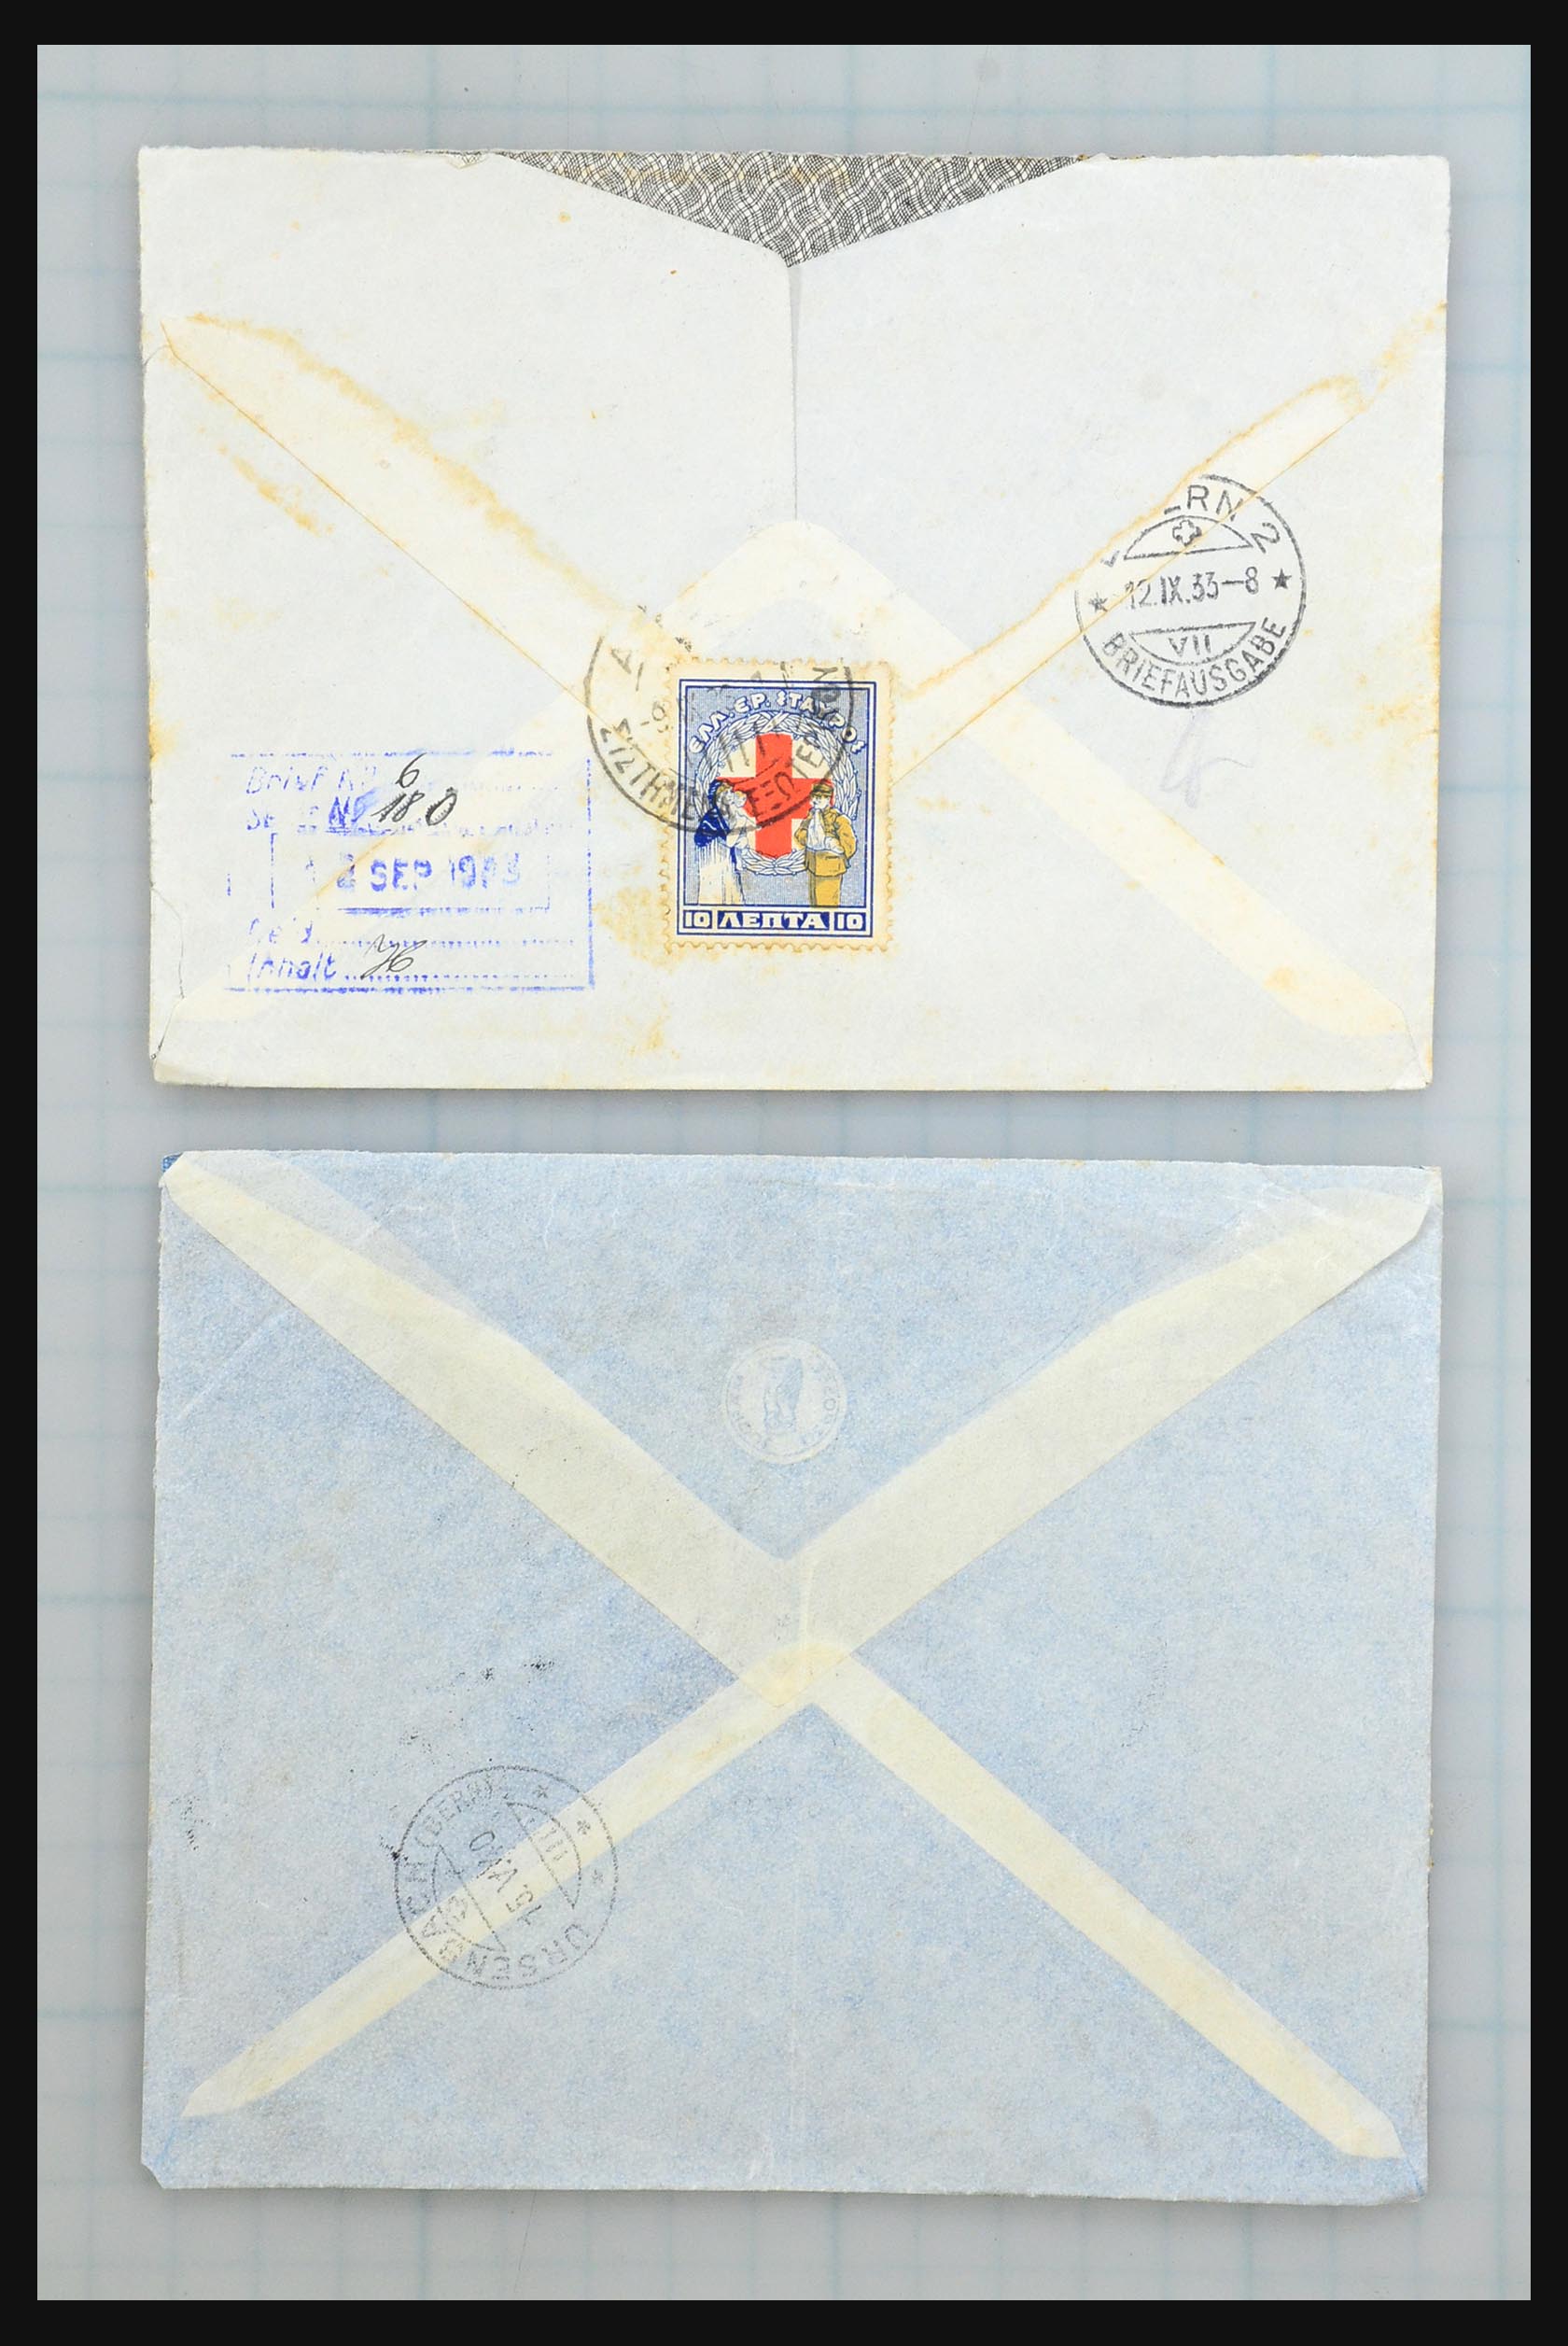 31358 019 - 31358 Portugal/Luxemburg/Greece covers 1880-1960.